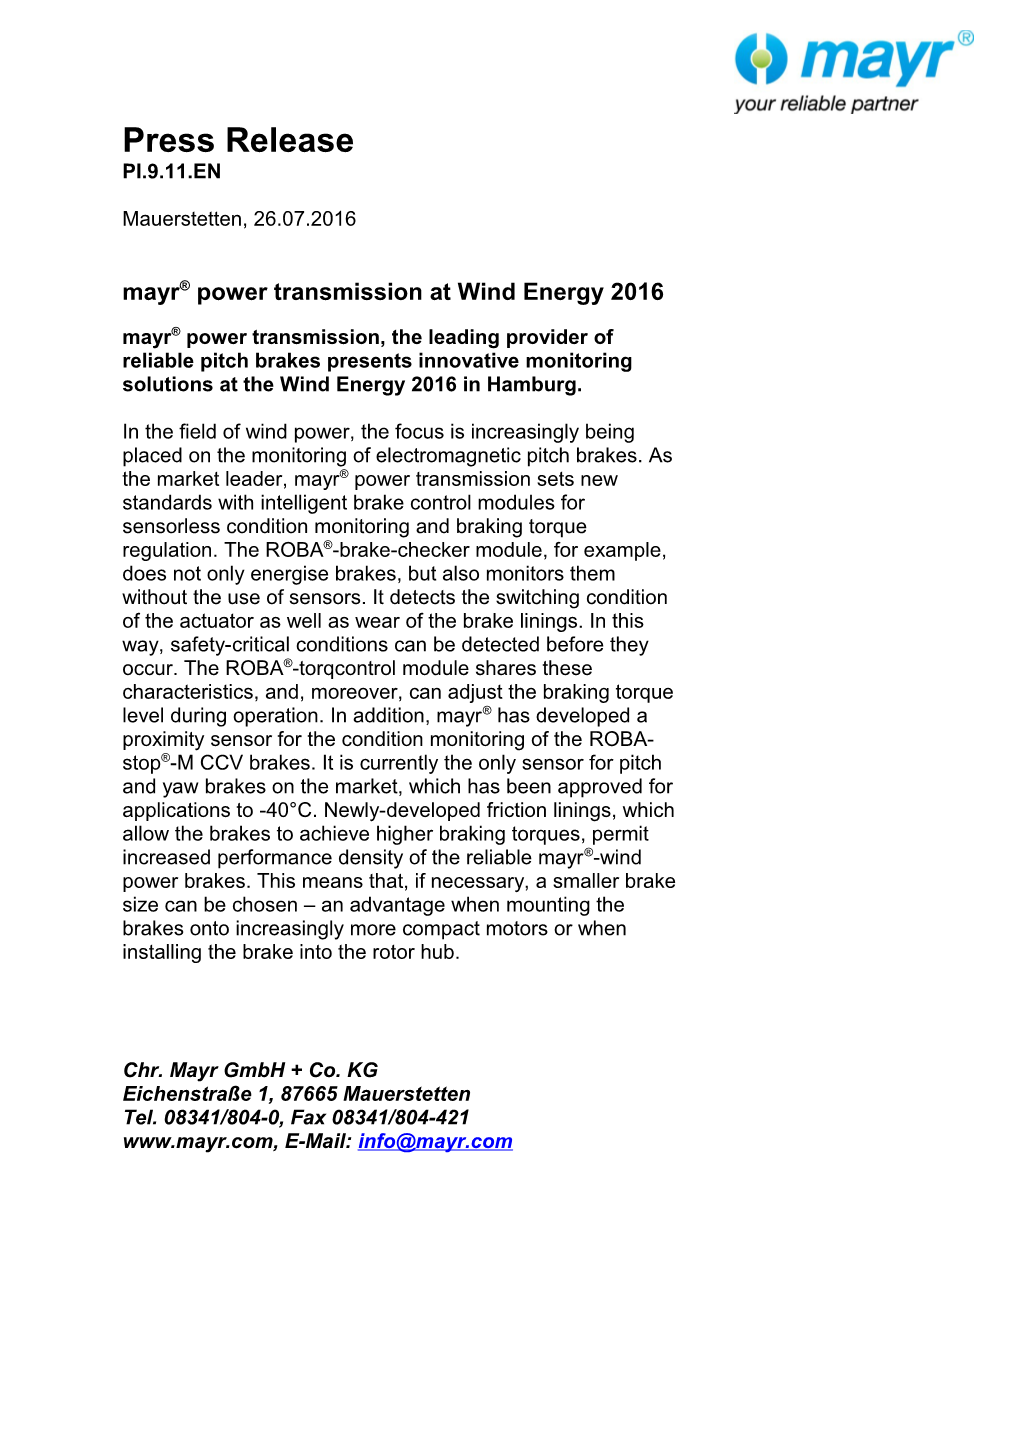 Mayr Power Transmission at Wind Energy 2016